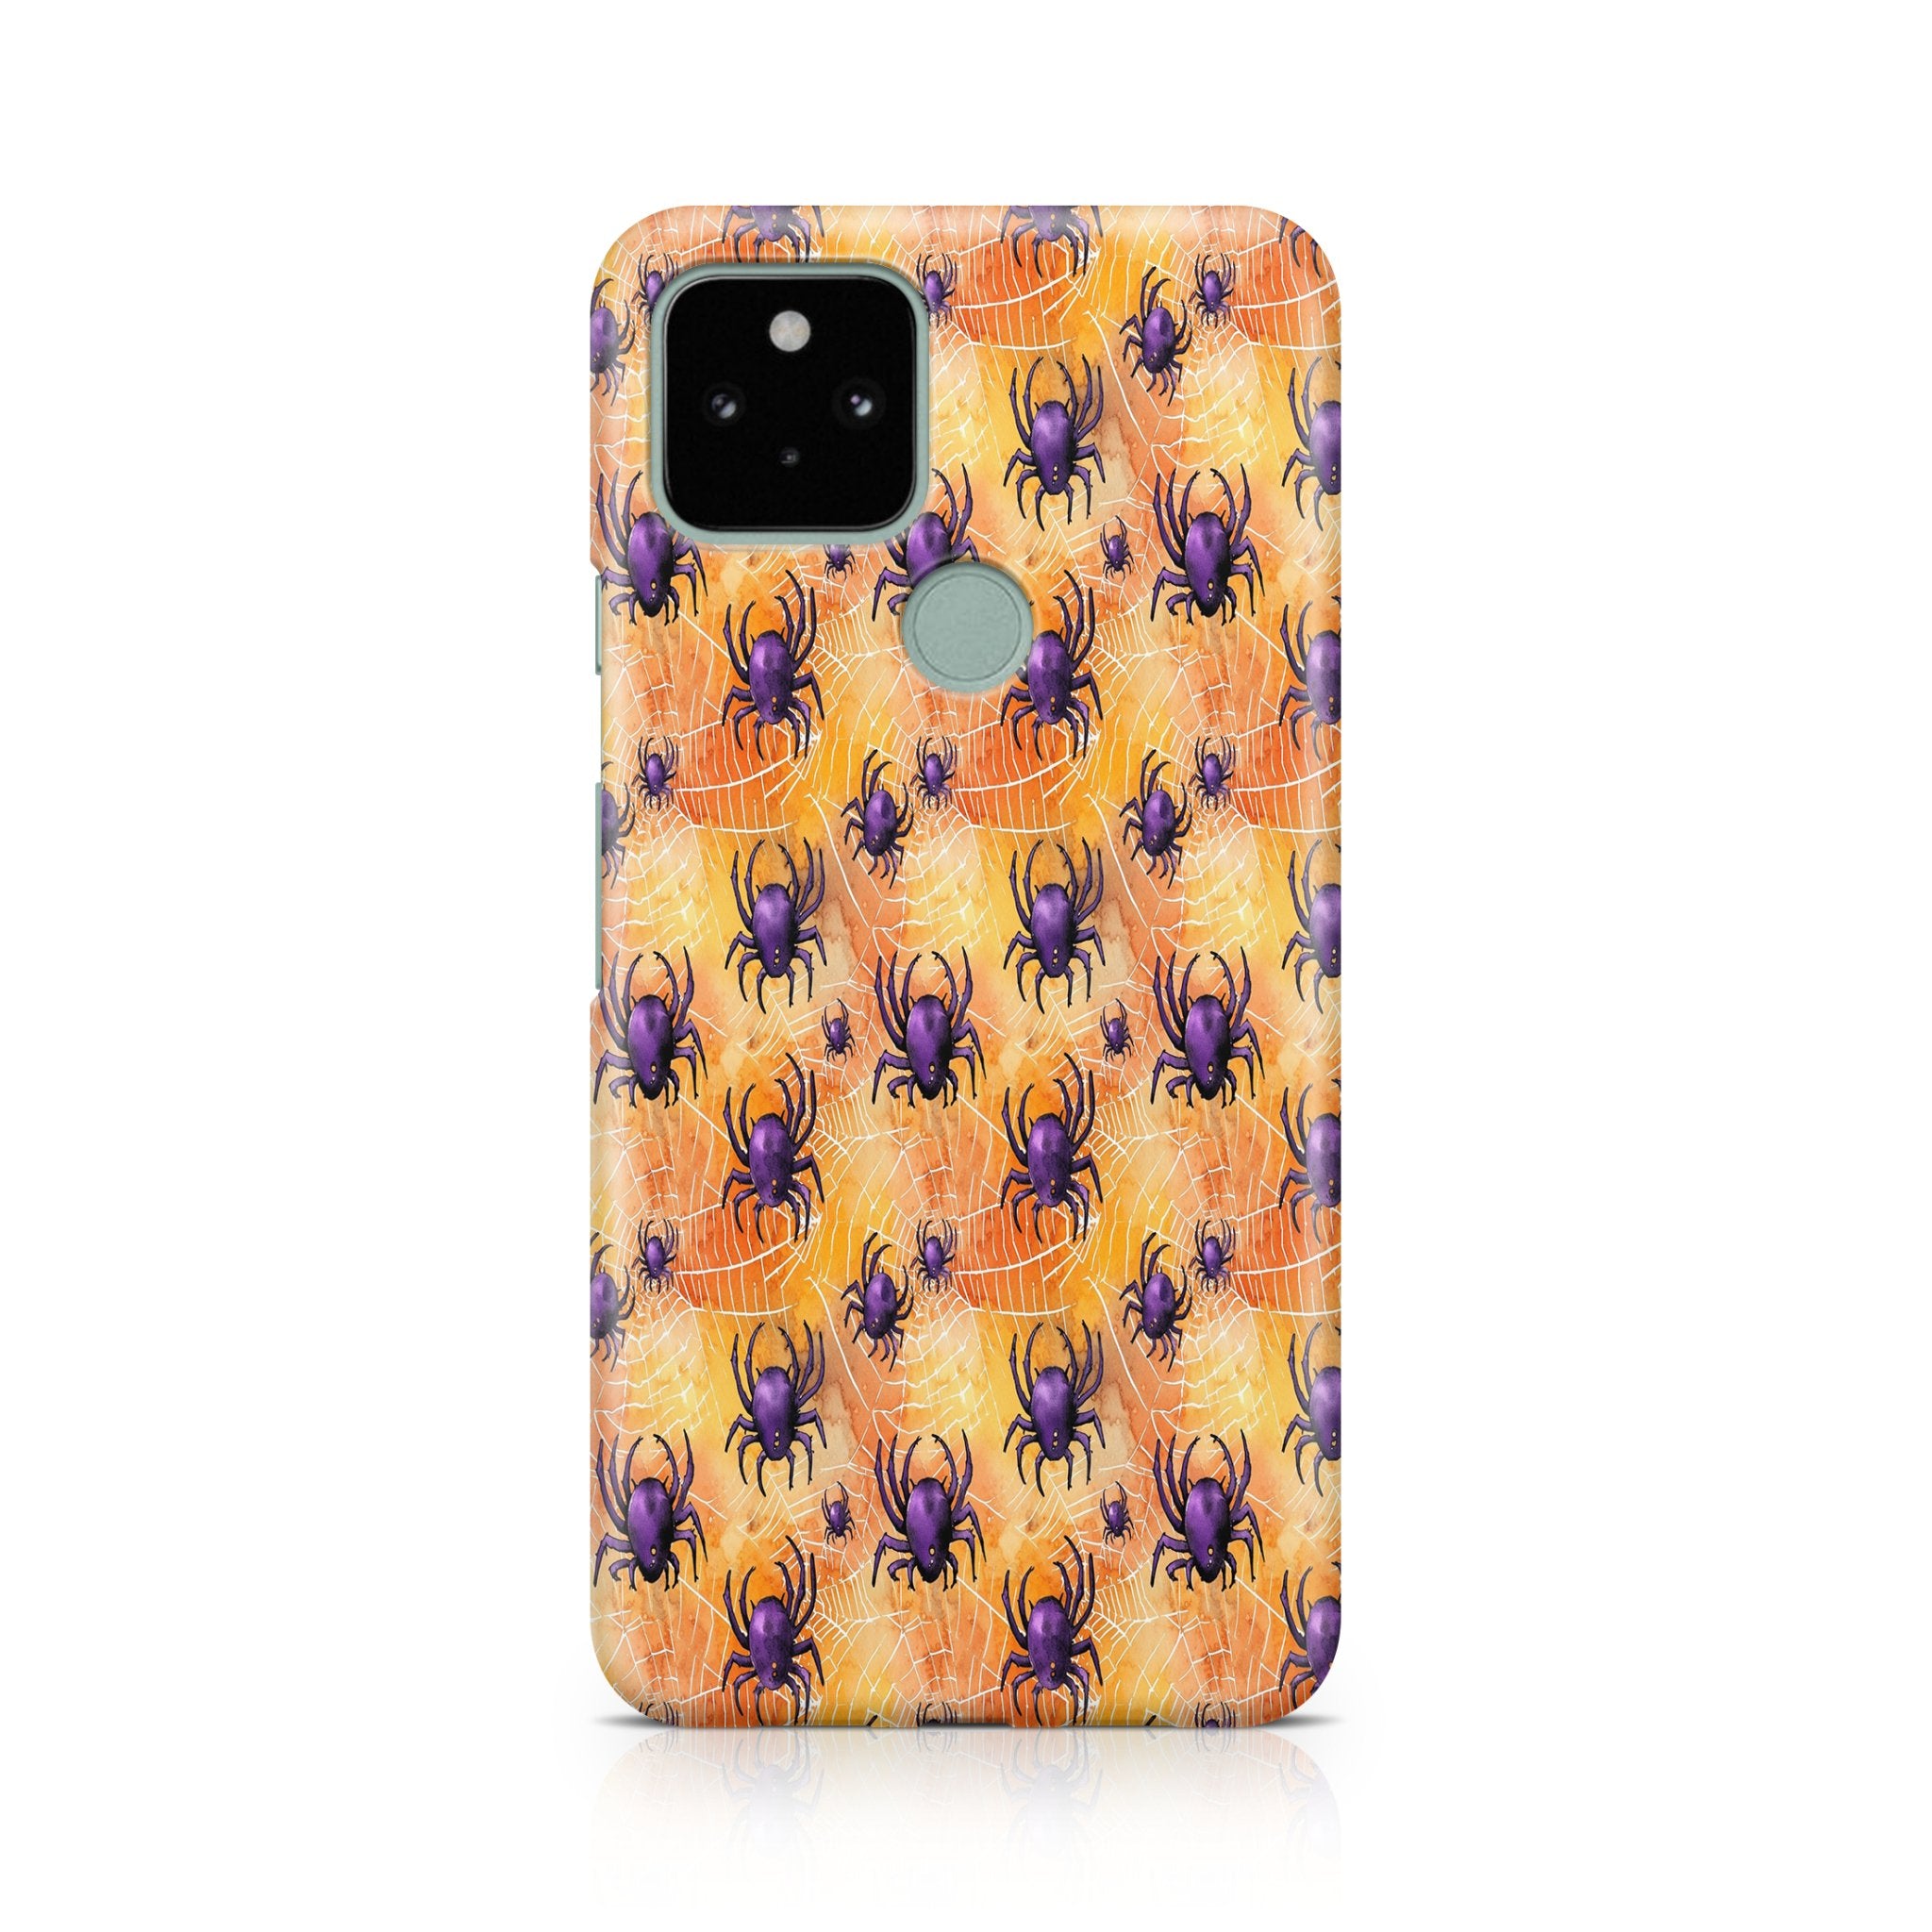 Halloween Creepers - Google phone case designs by CaseSwagger